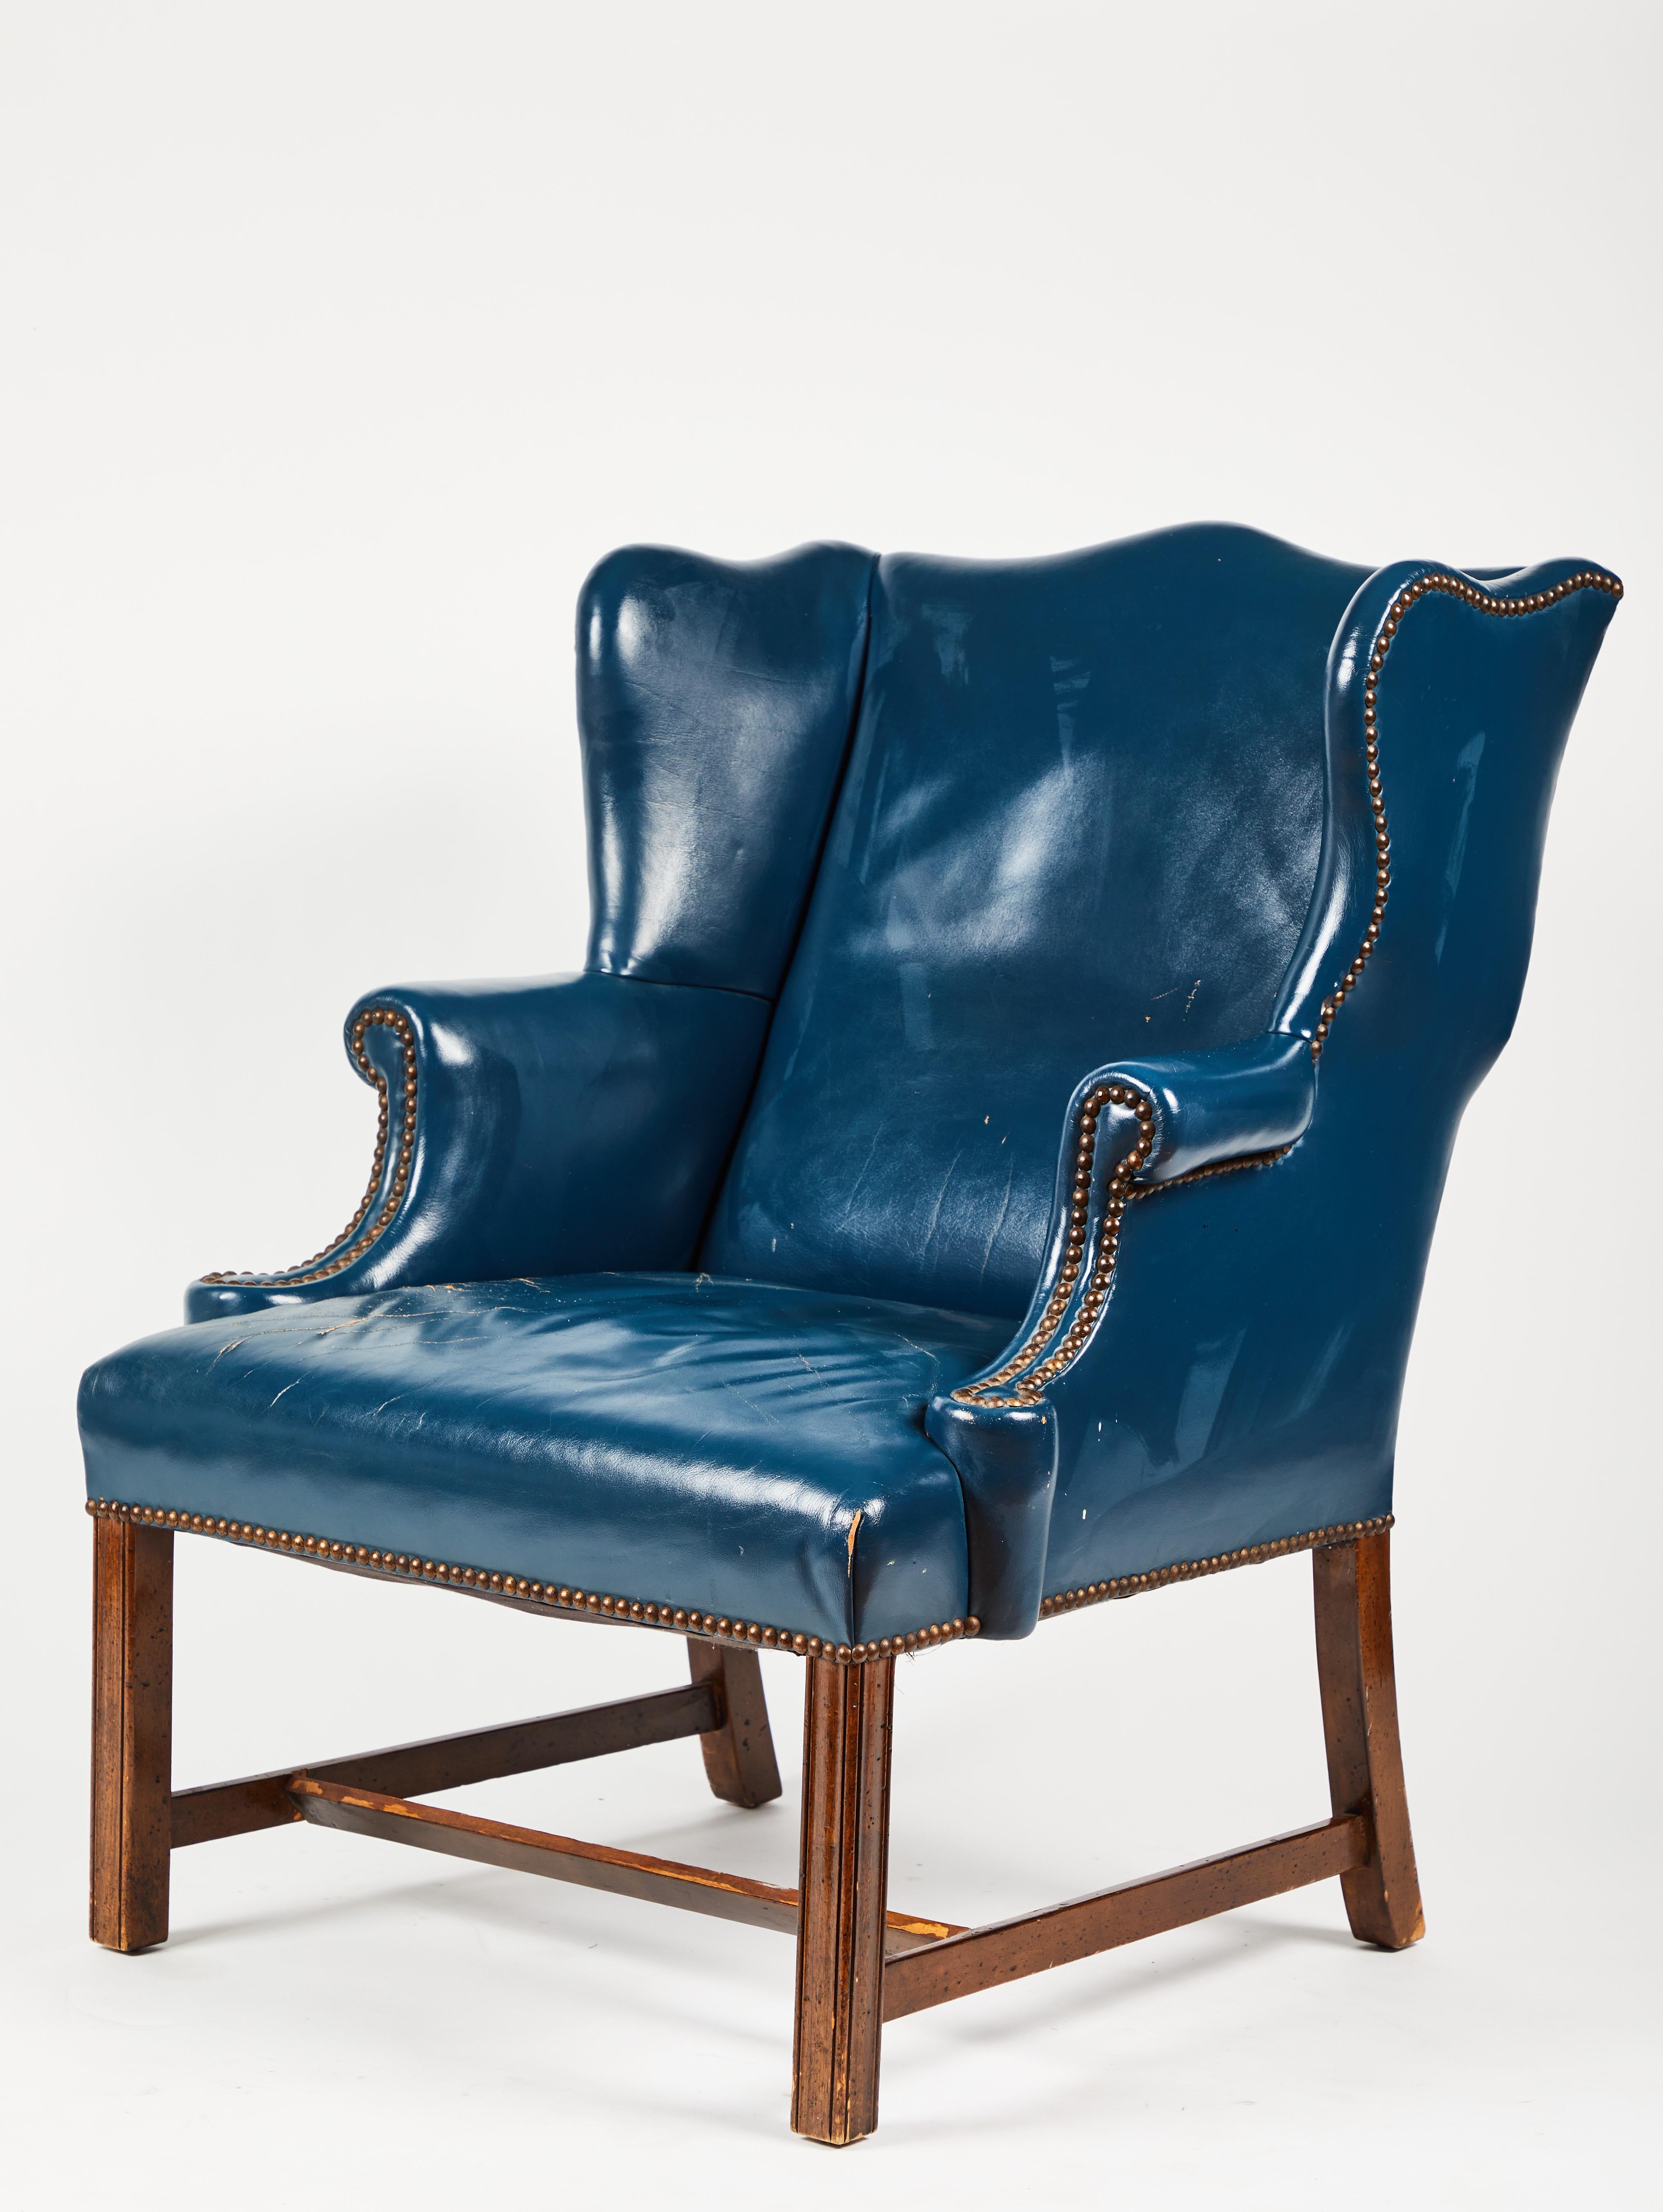 20th Century Antique Blue Leather Wingback Chair For Sale